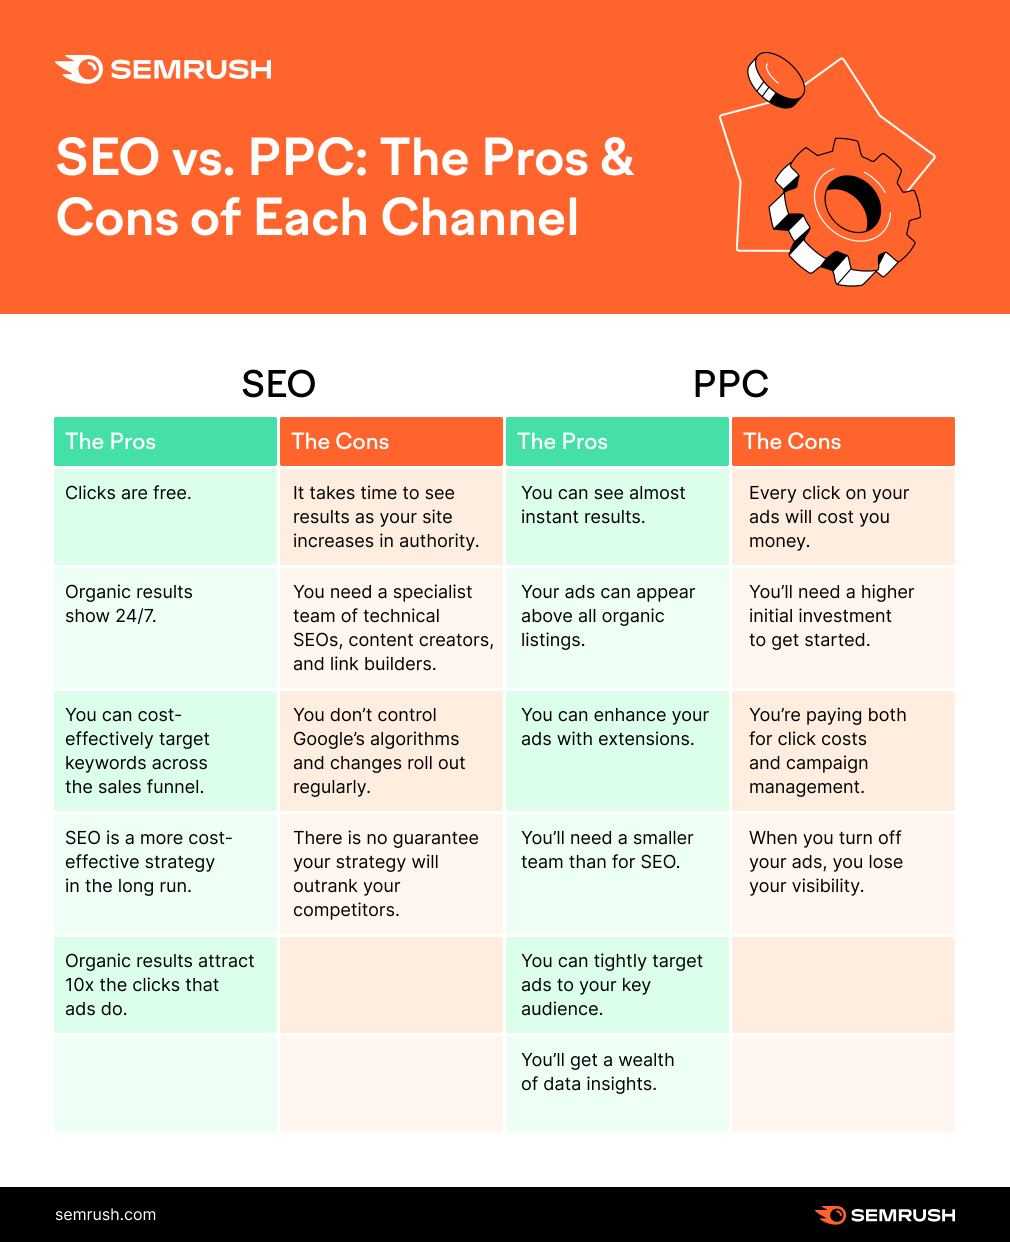 SEO vs. PPC: the pros and cons of each channel